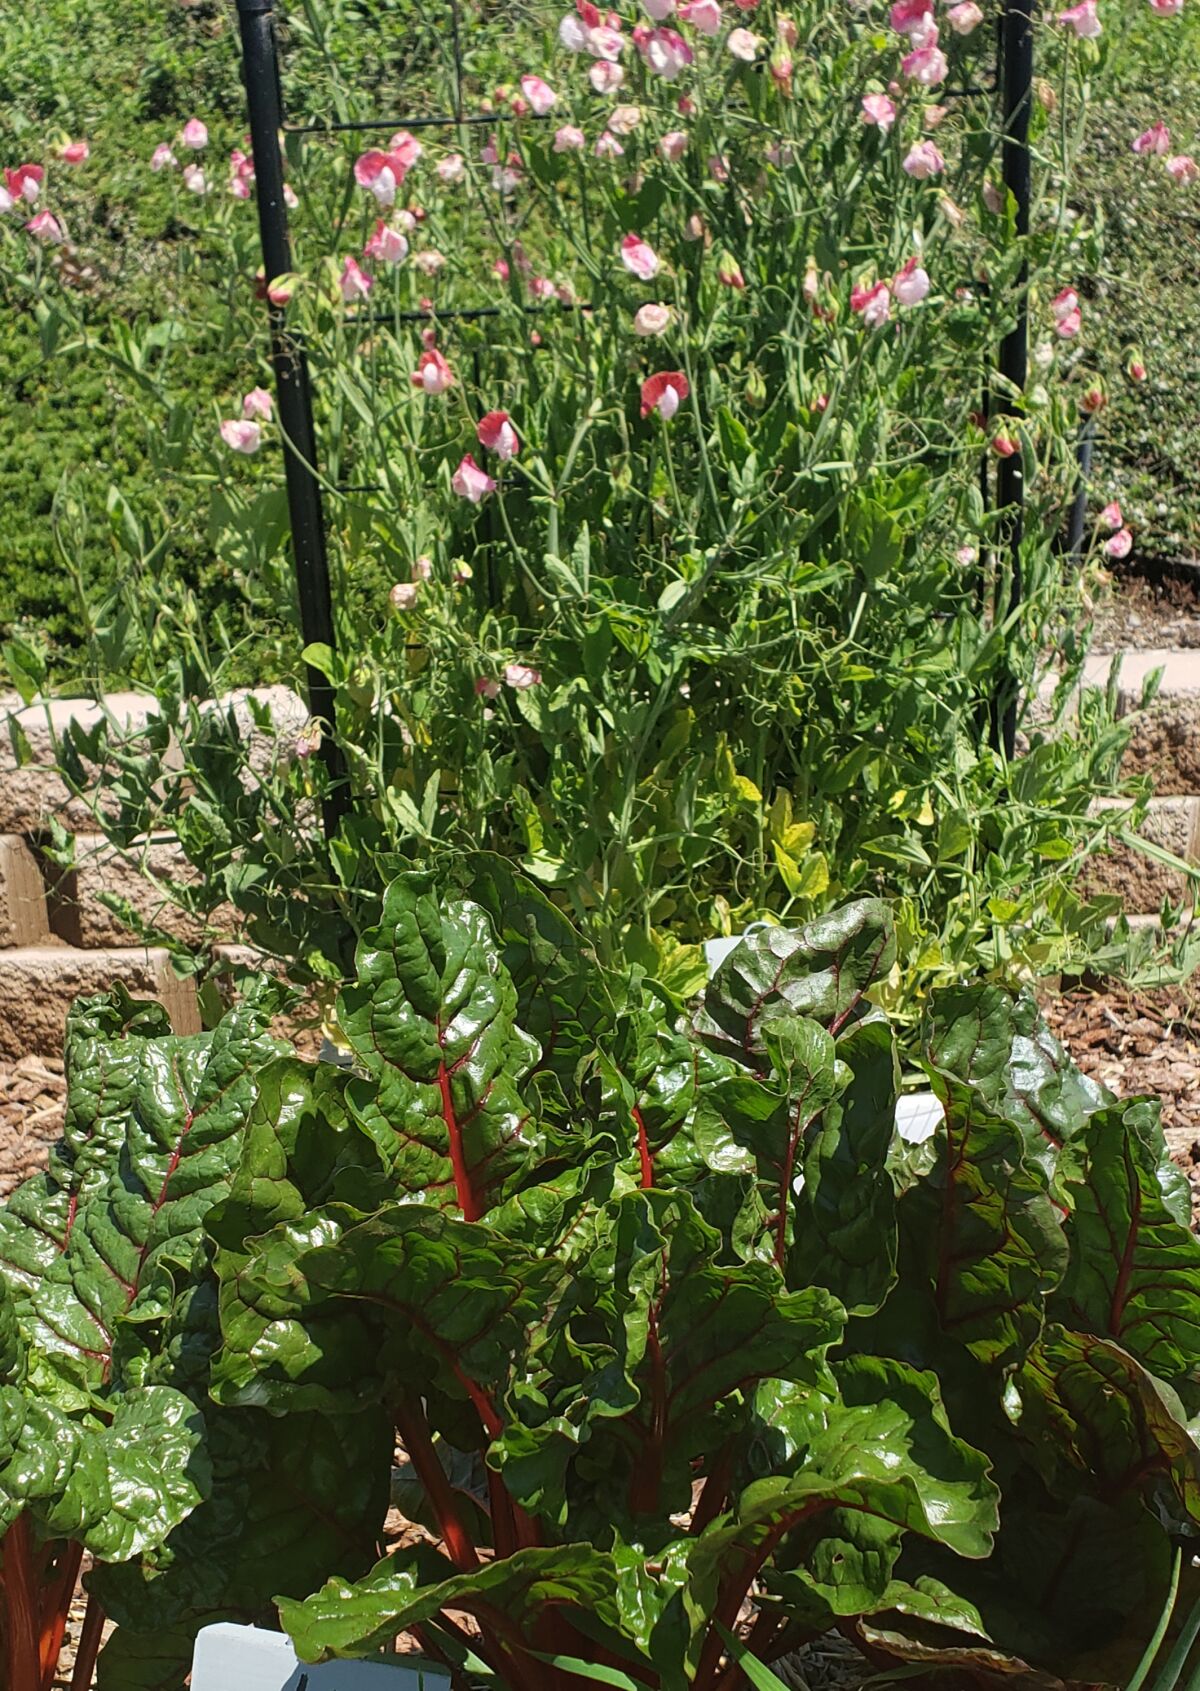 The San Diego Master Gardener demonstration garden has chard and flowering sweet peas grown in a straw bale.